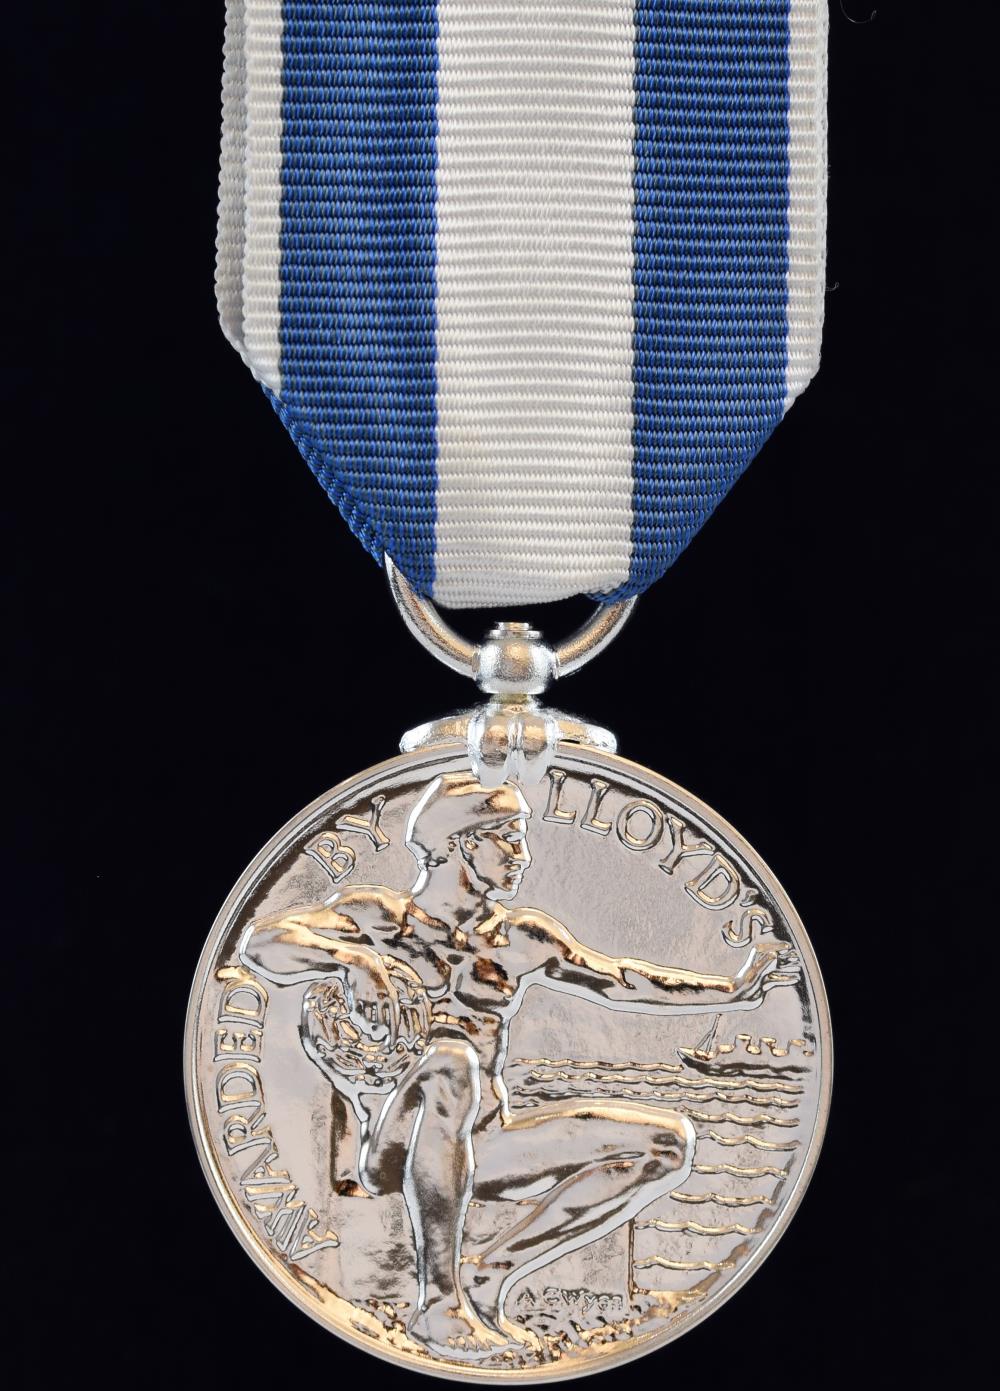 Lloyds War Medal For Bravery at Sea